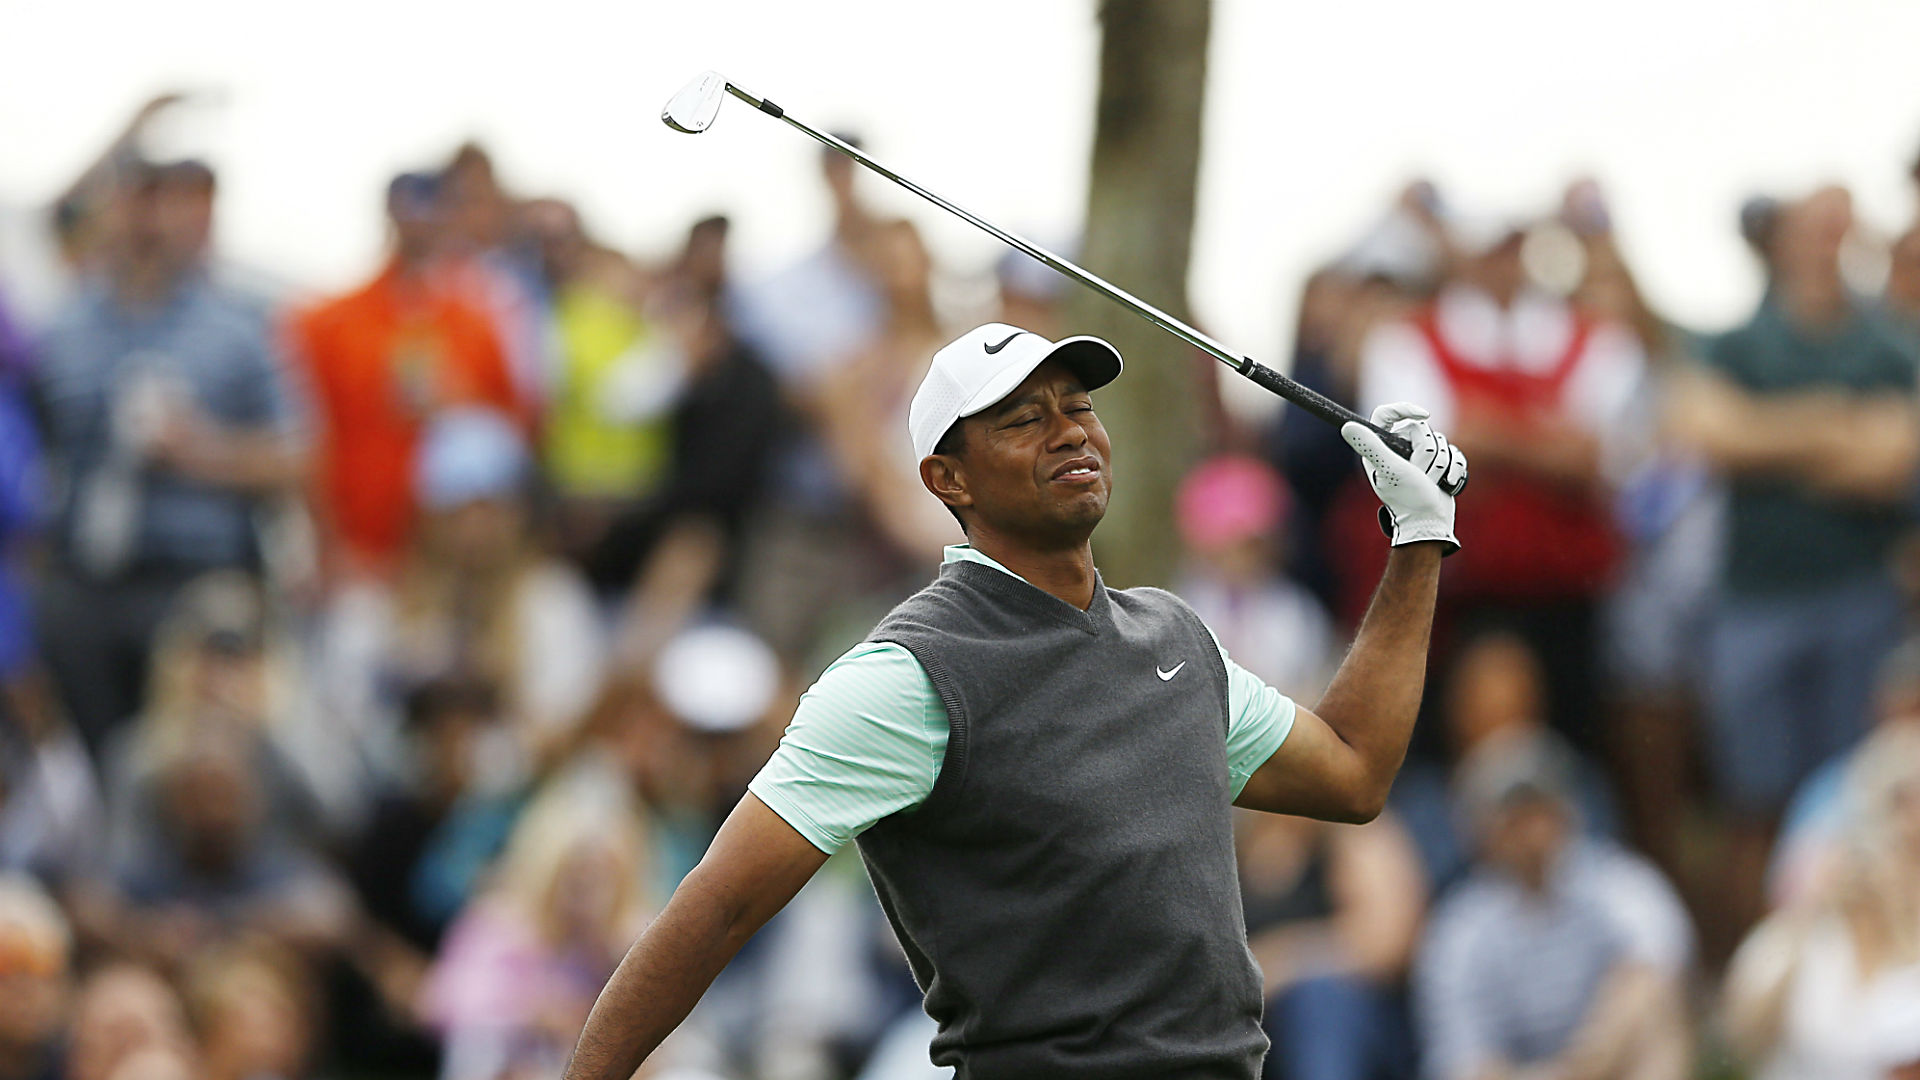 Tiger Woods' score: Results, highlights from Round 3 at Players Championship | Golf ...1920 x 1080